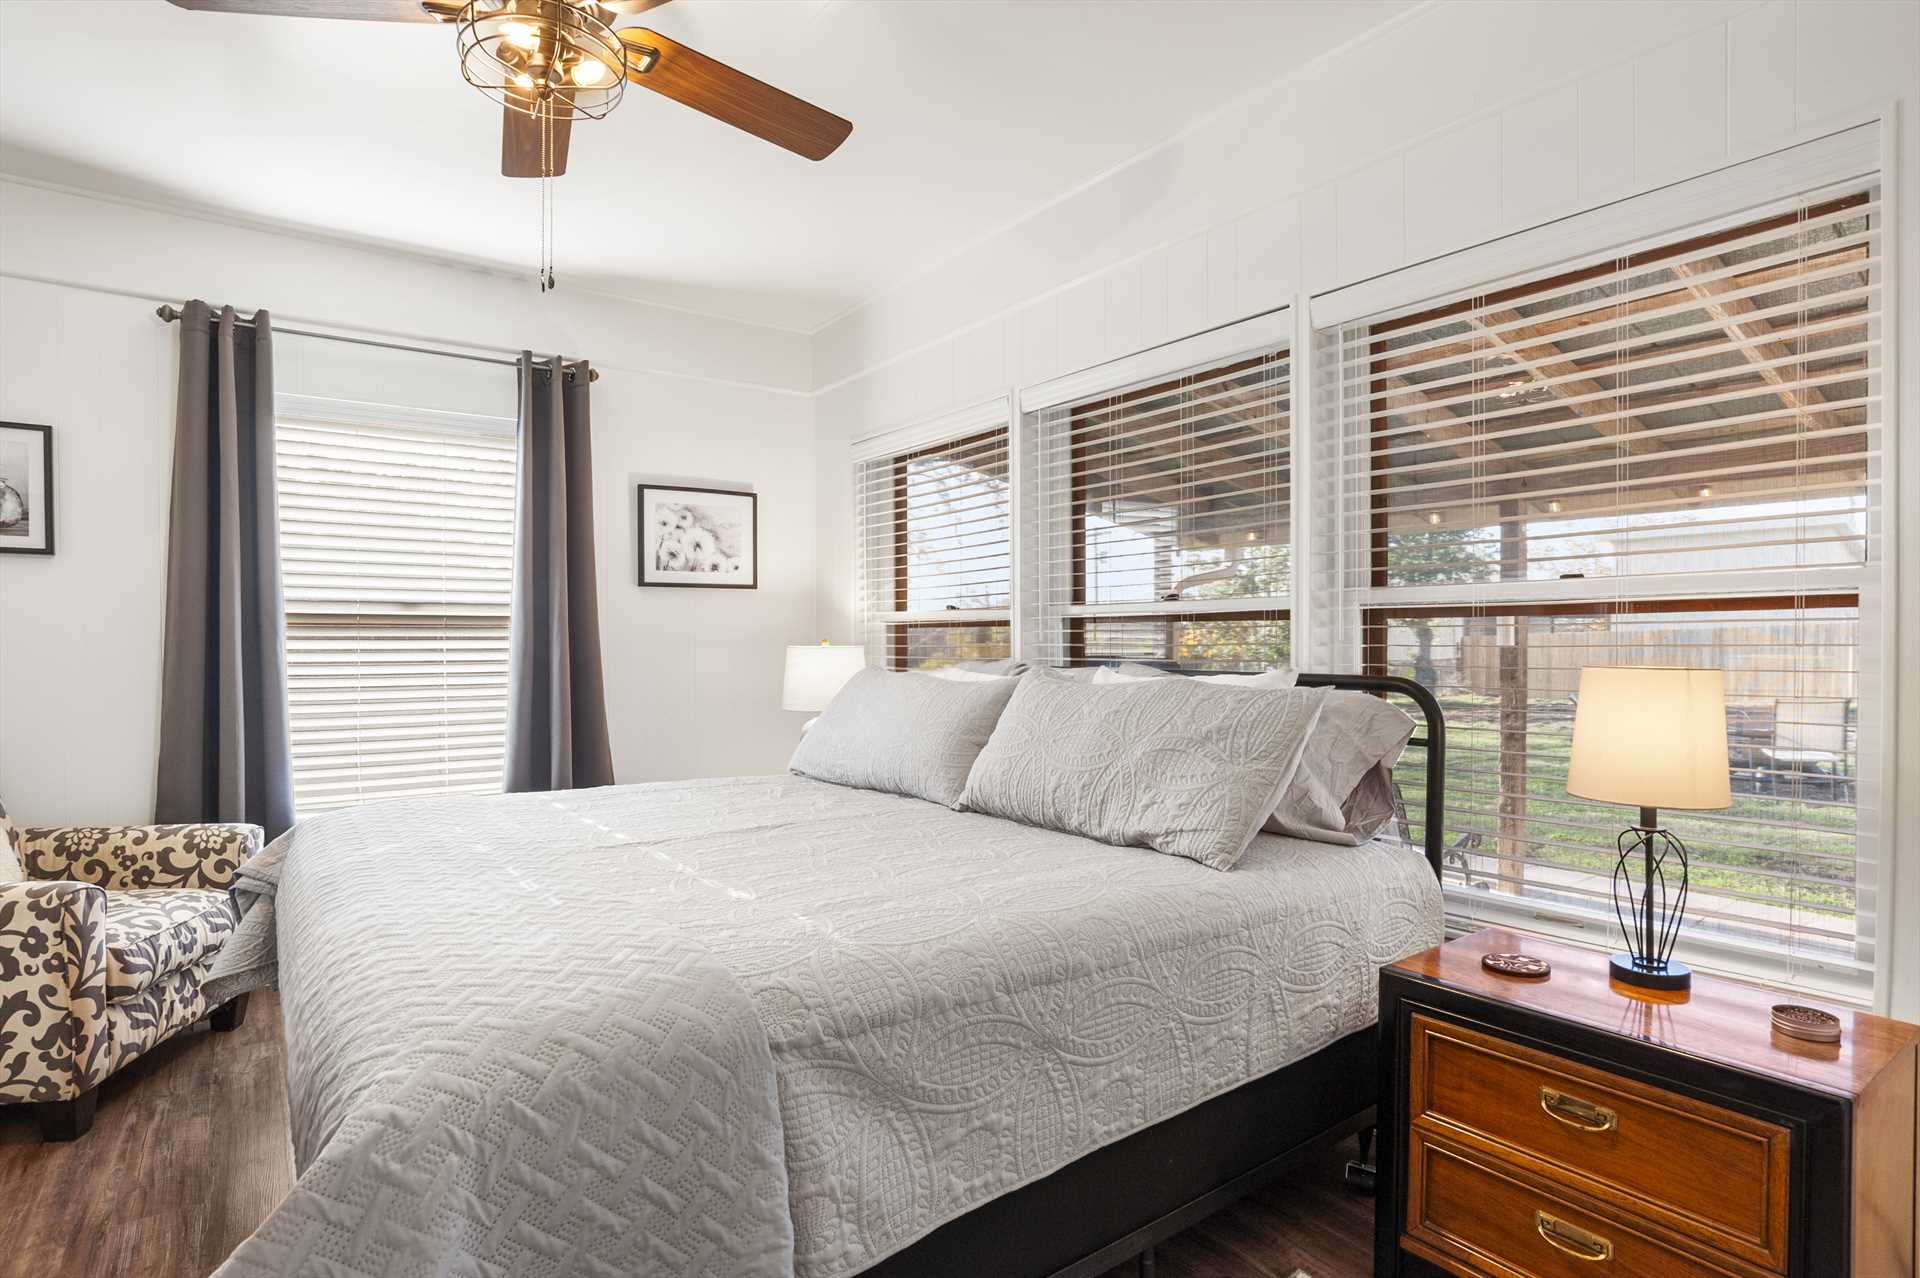                                                 A soft and roomy king-sized bed graces the first bedroom here, with big windows that welcome natural light into the room.